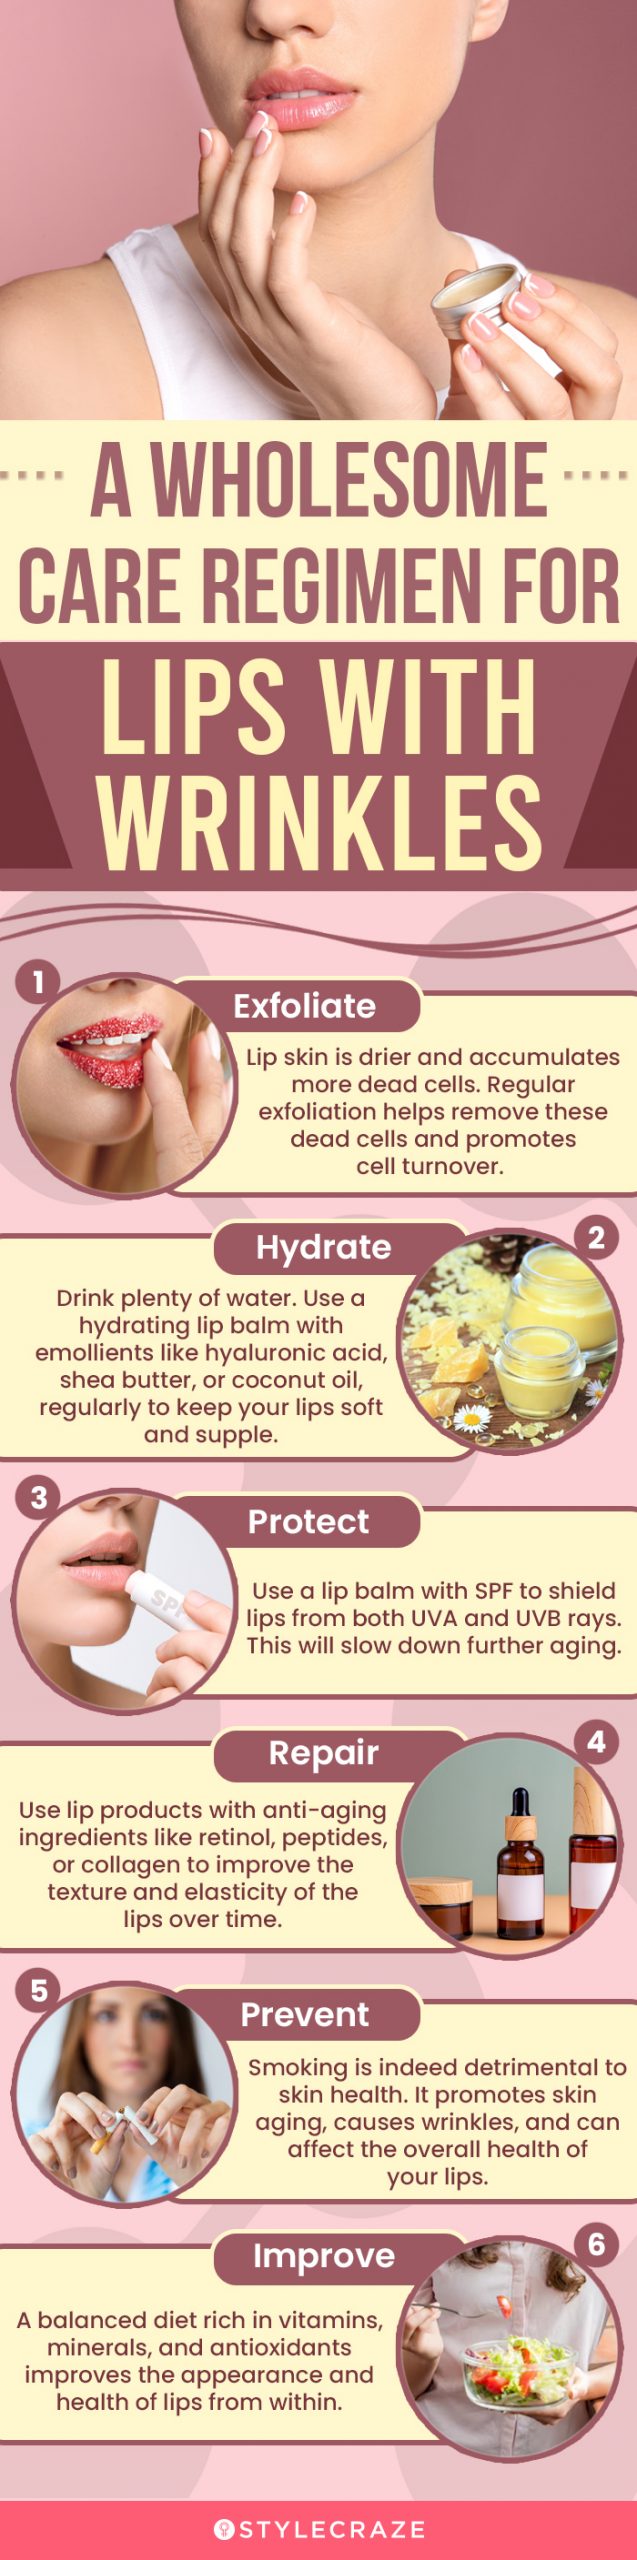 A Wholesome Care Regimen For Lips With Wrinkles (infographic)